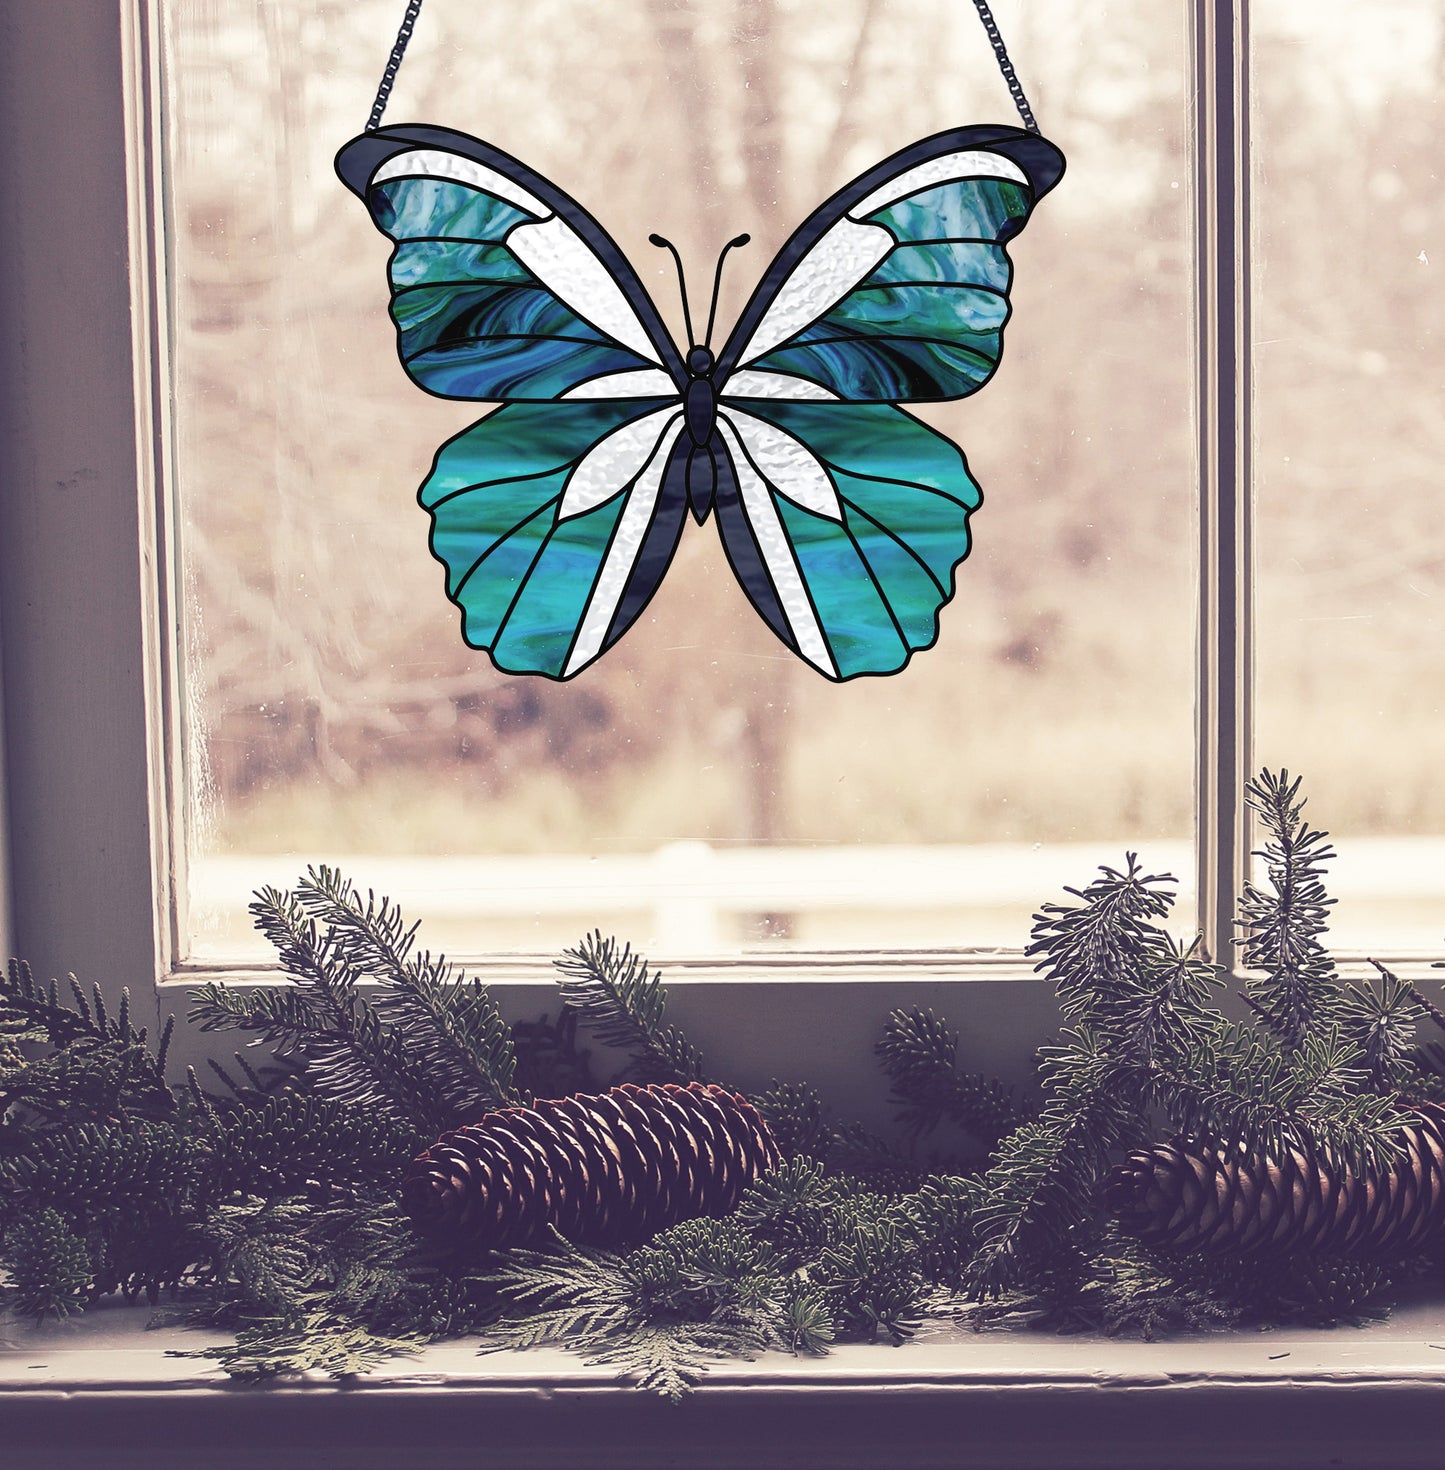 Butterfly stained glass pattern, instant PDF download, shown in window with pine cones